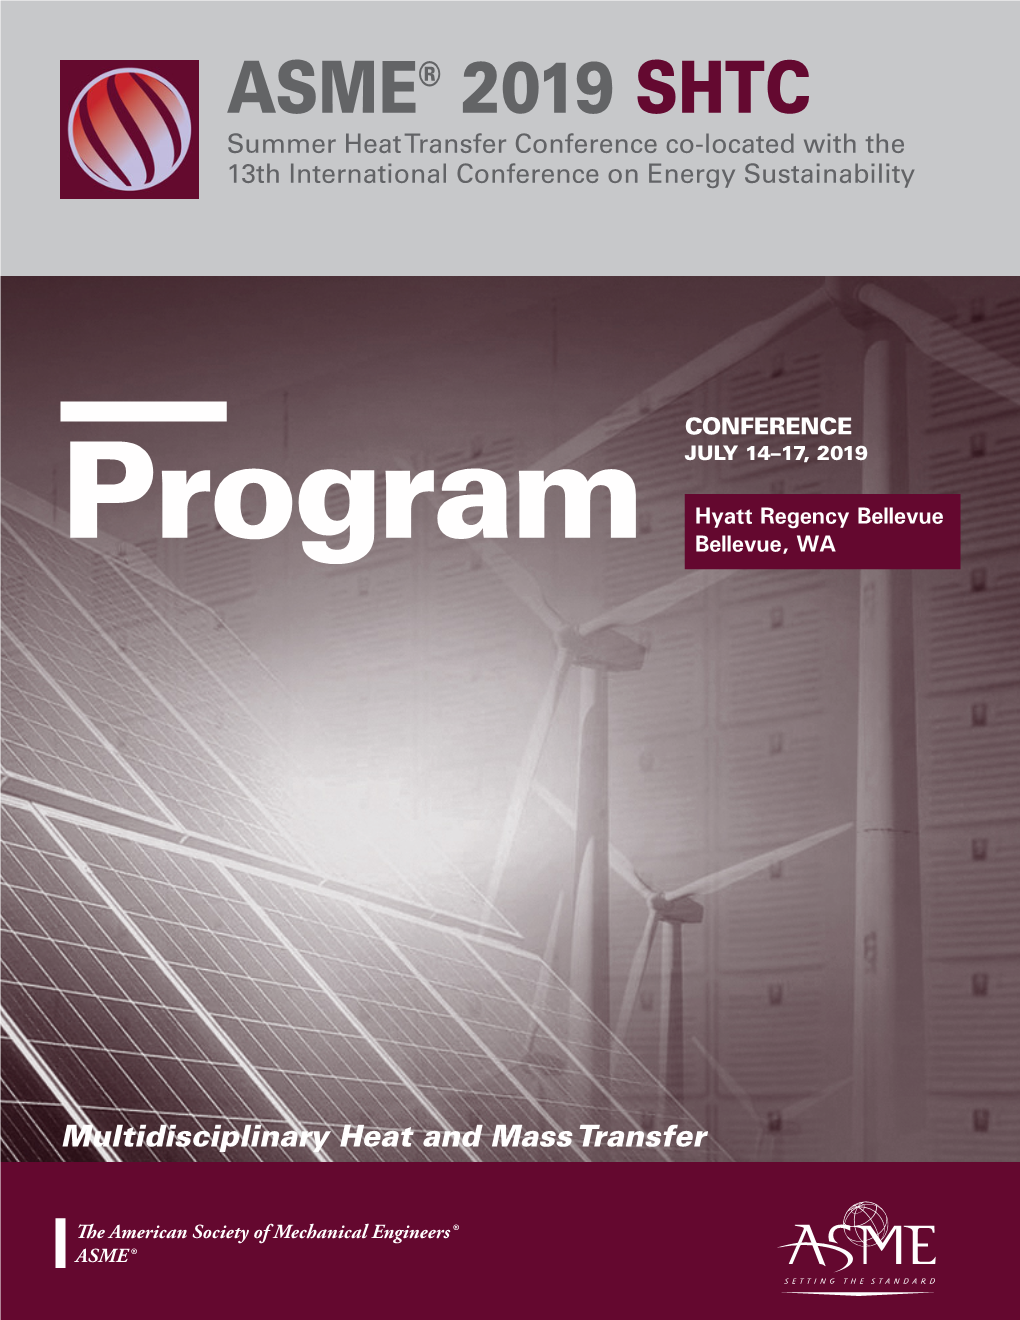 ASME® 2019 SHTC Summer Heat Transfer Conference Co-Located with the 13Th International Conference on Energy Sustainability